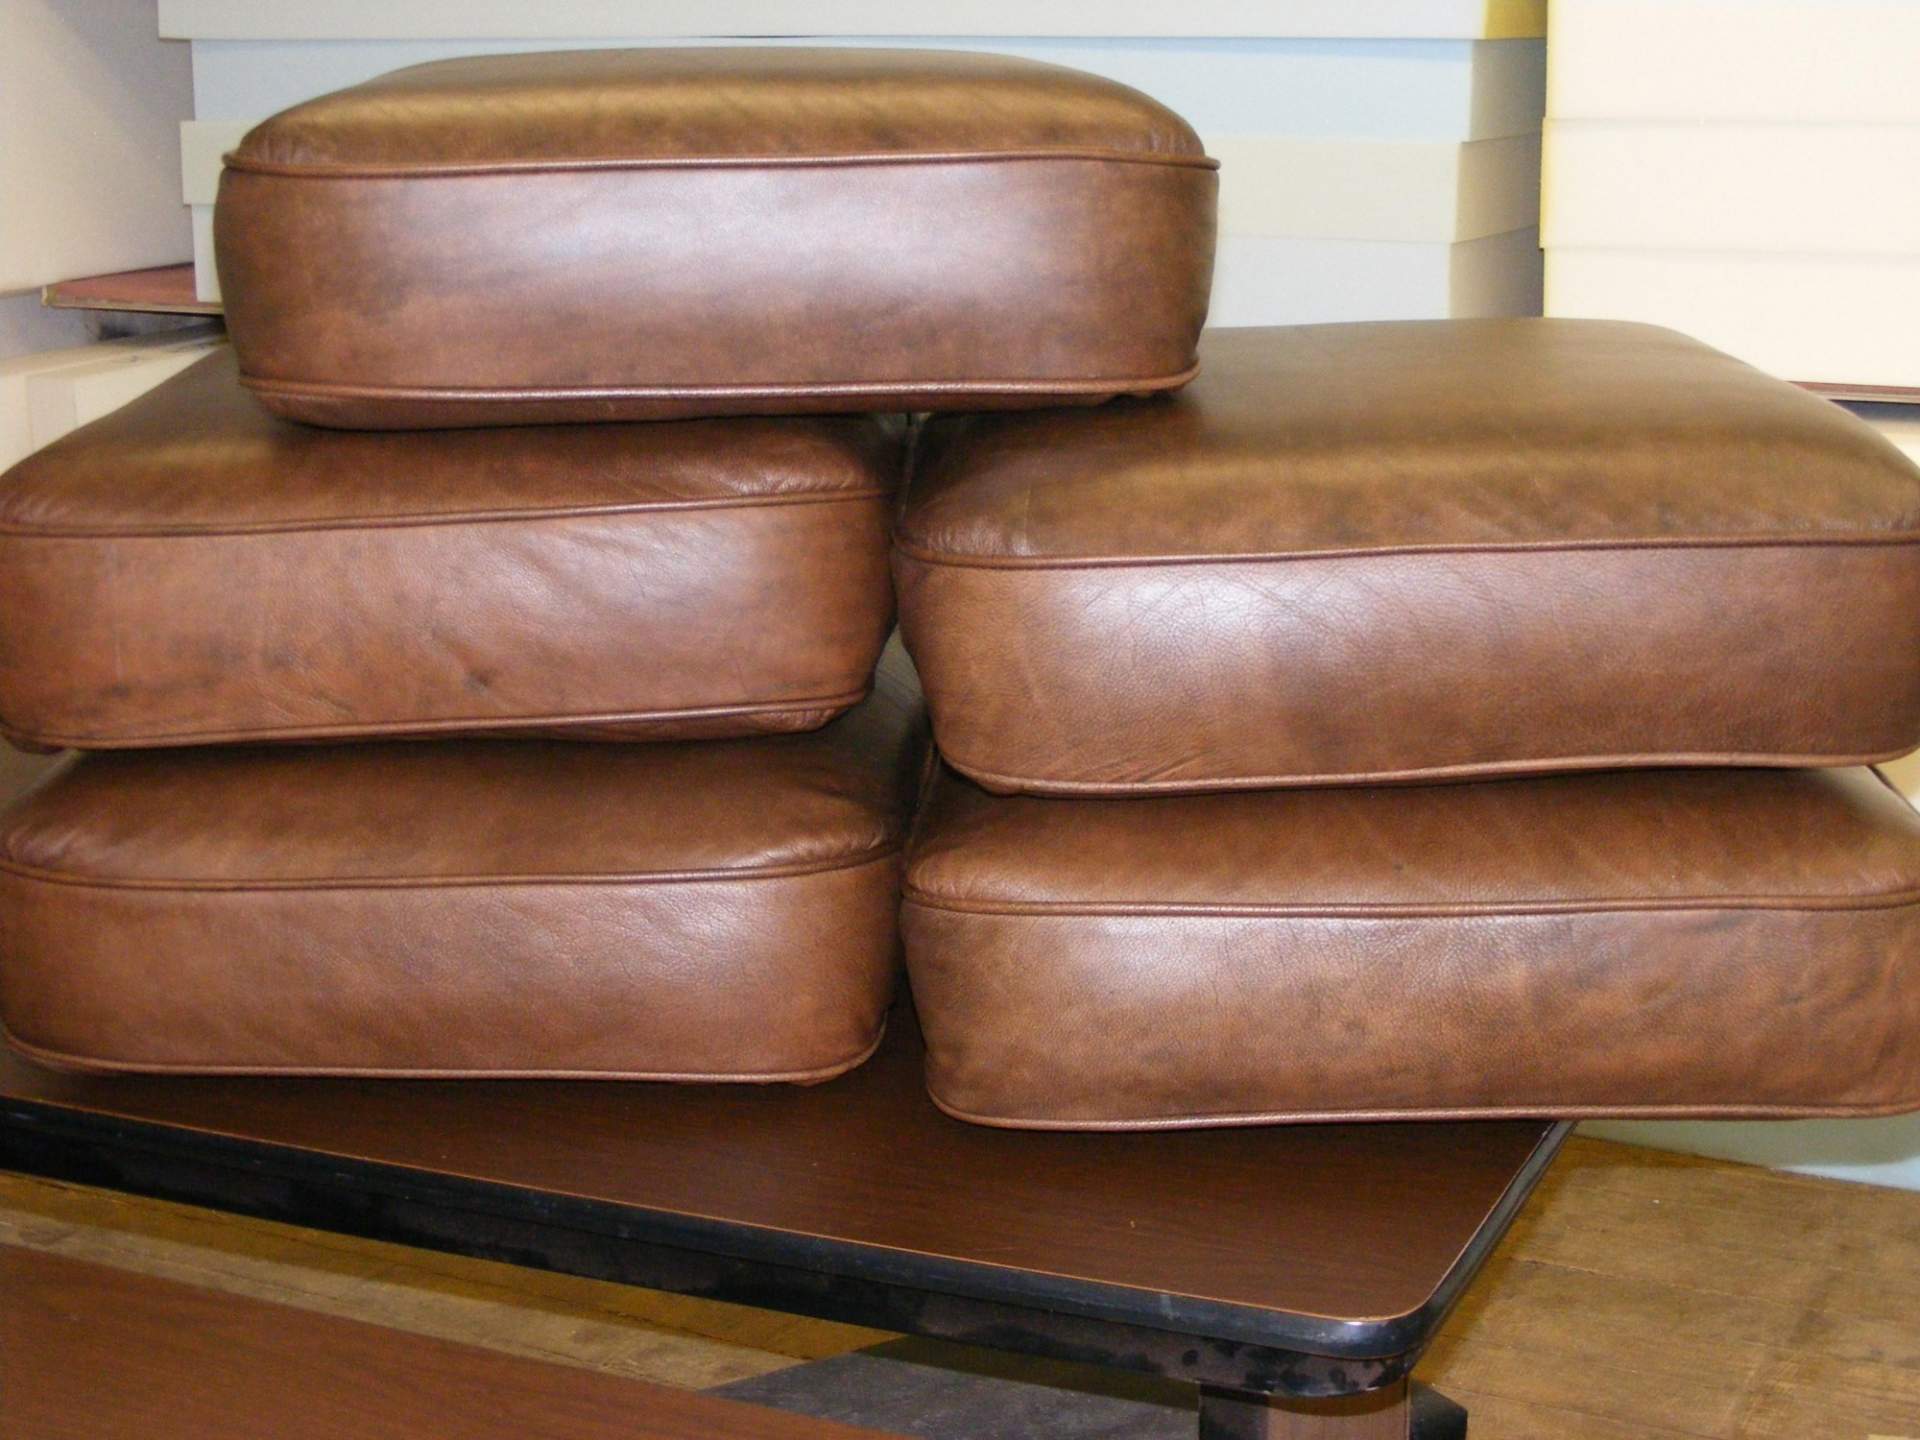 my leather sofa cushions need refilling